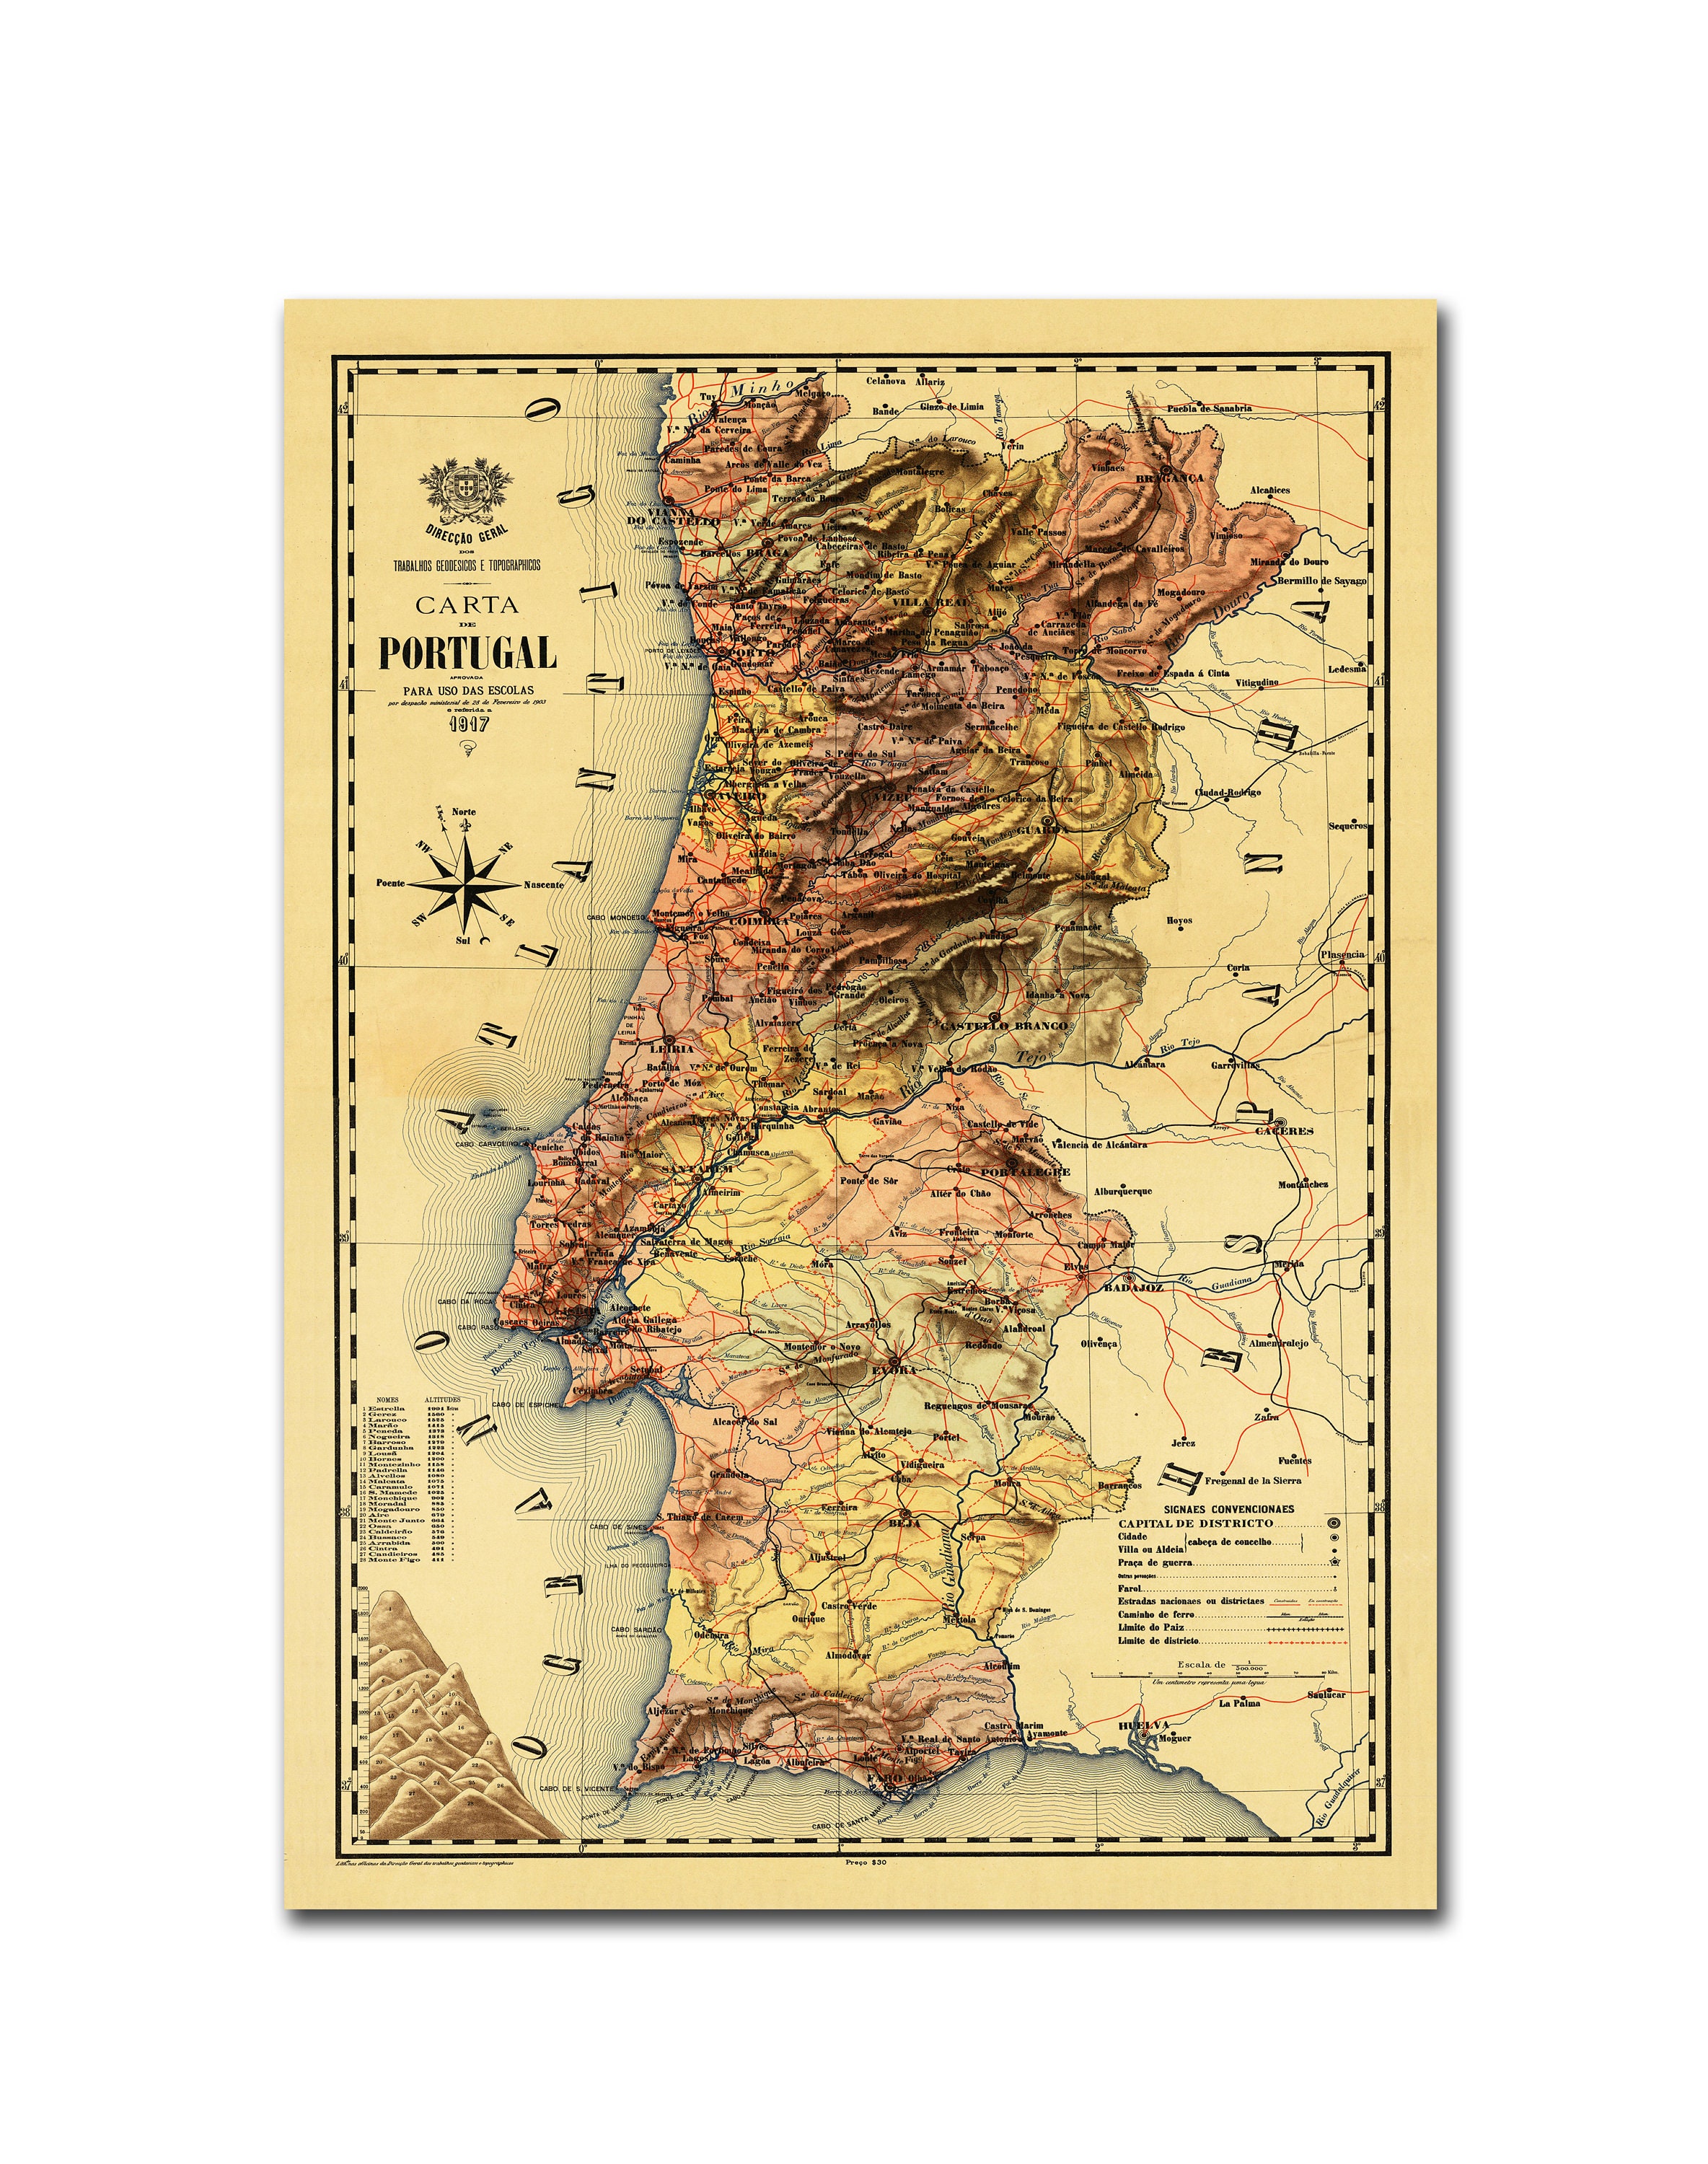 Old Map of Portugal 1917 Mapa de Portugal Portuguese map Vintage Portugal  Map - VINTAGE MAPS AND PRINTS